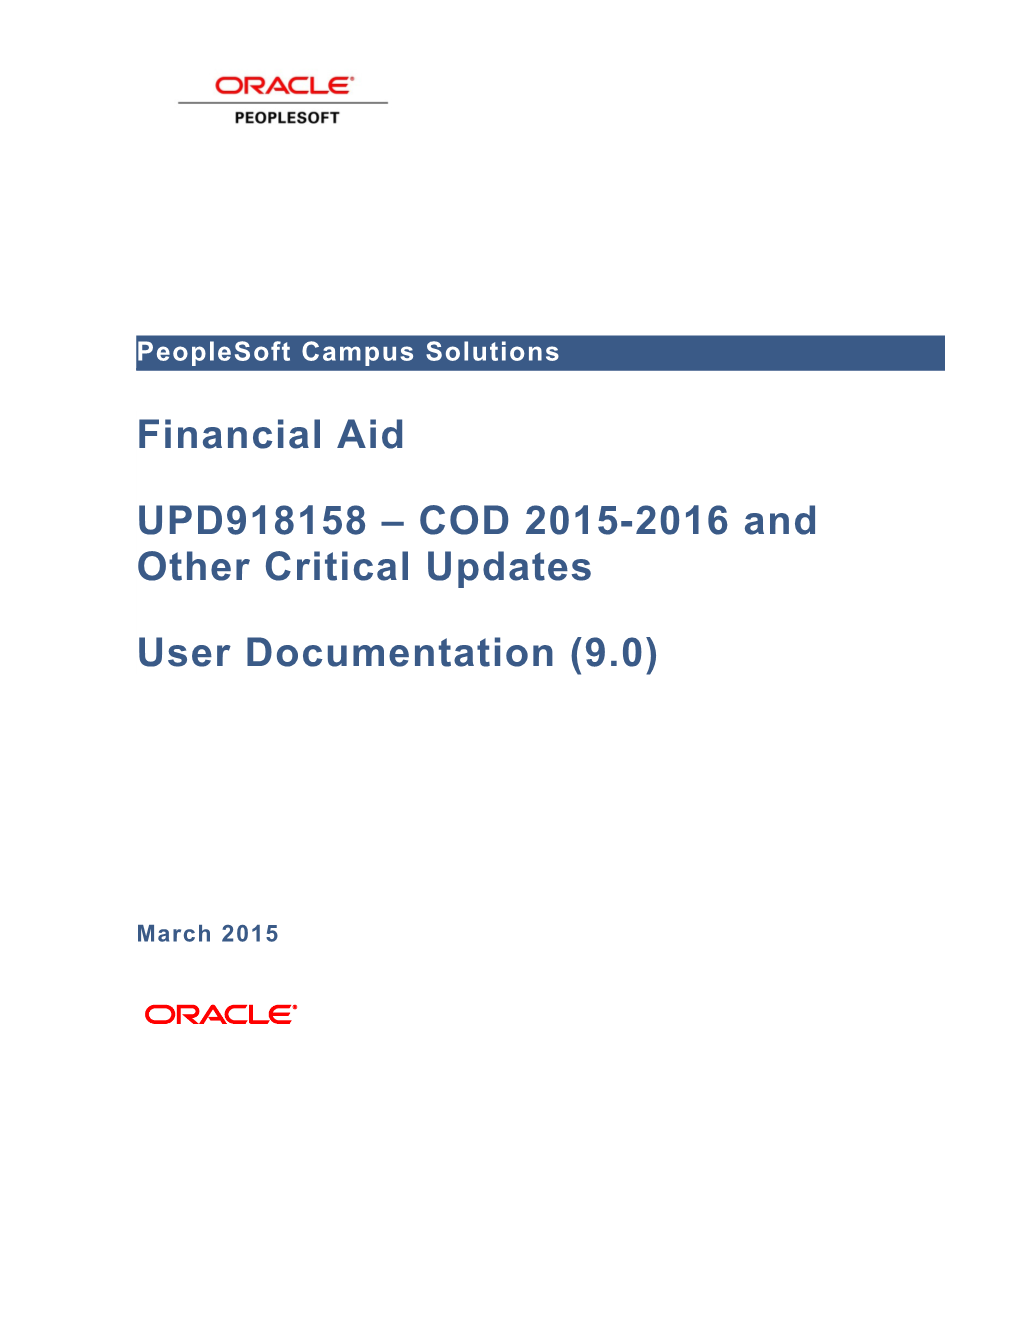 UPD918158 COD 2015-2016 and Other Critical Updates